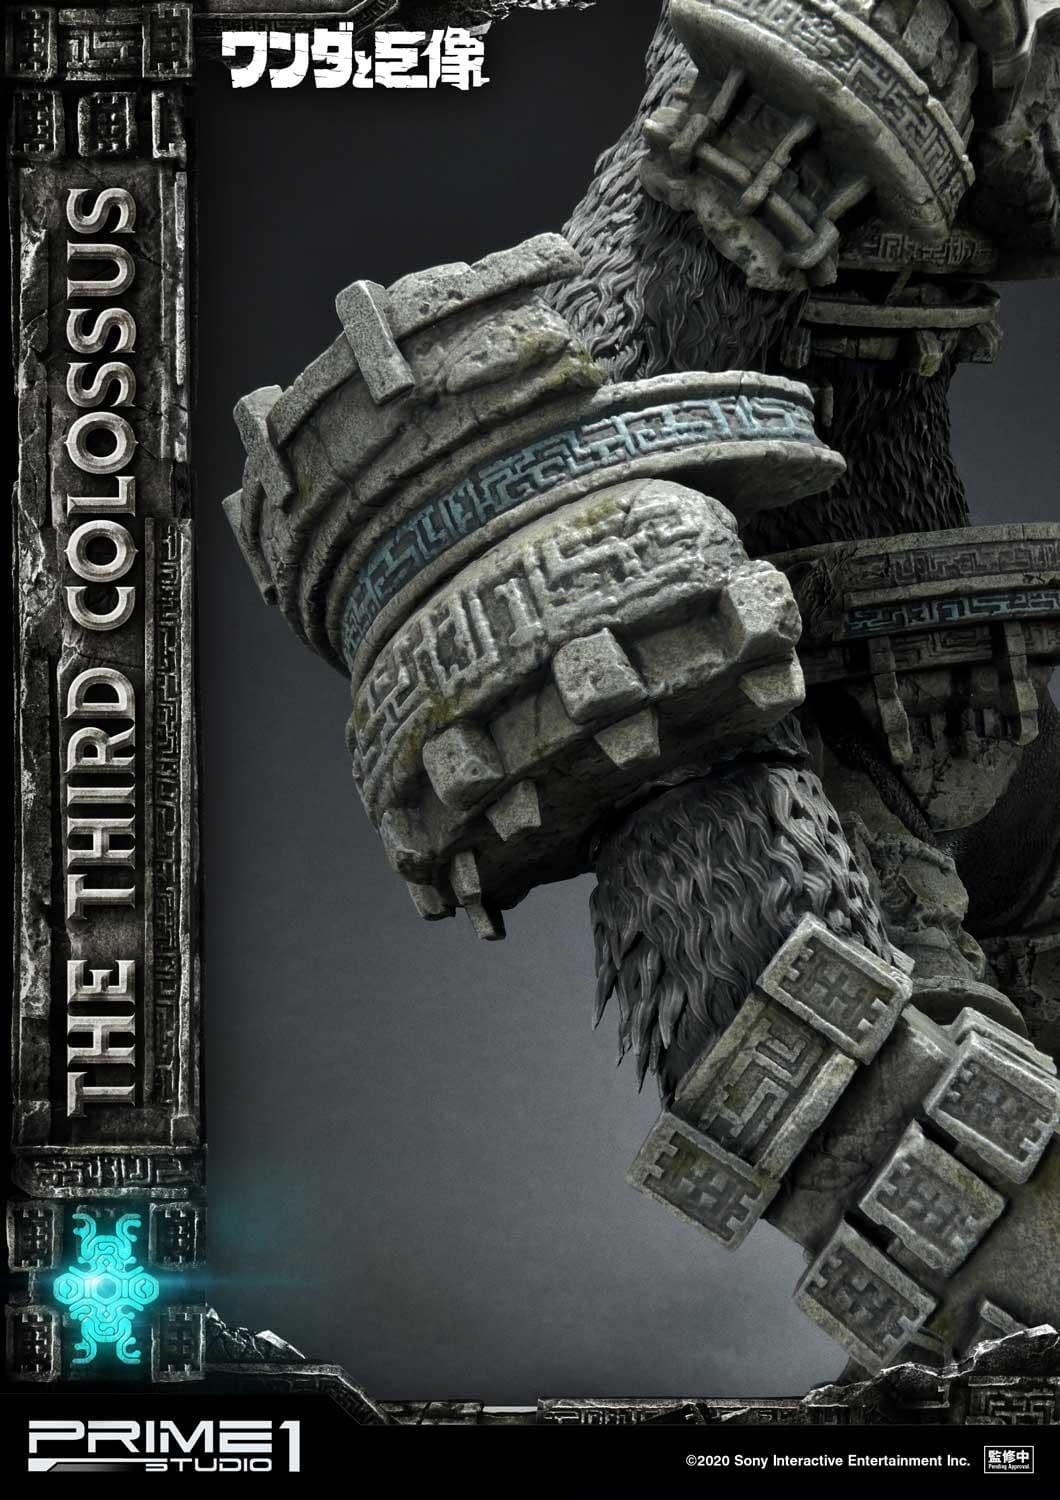 "Shadow of the Colossus" Gets New Statue with Prime 1 Studio